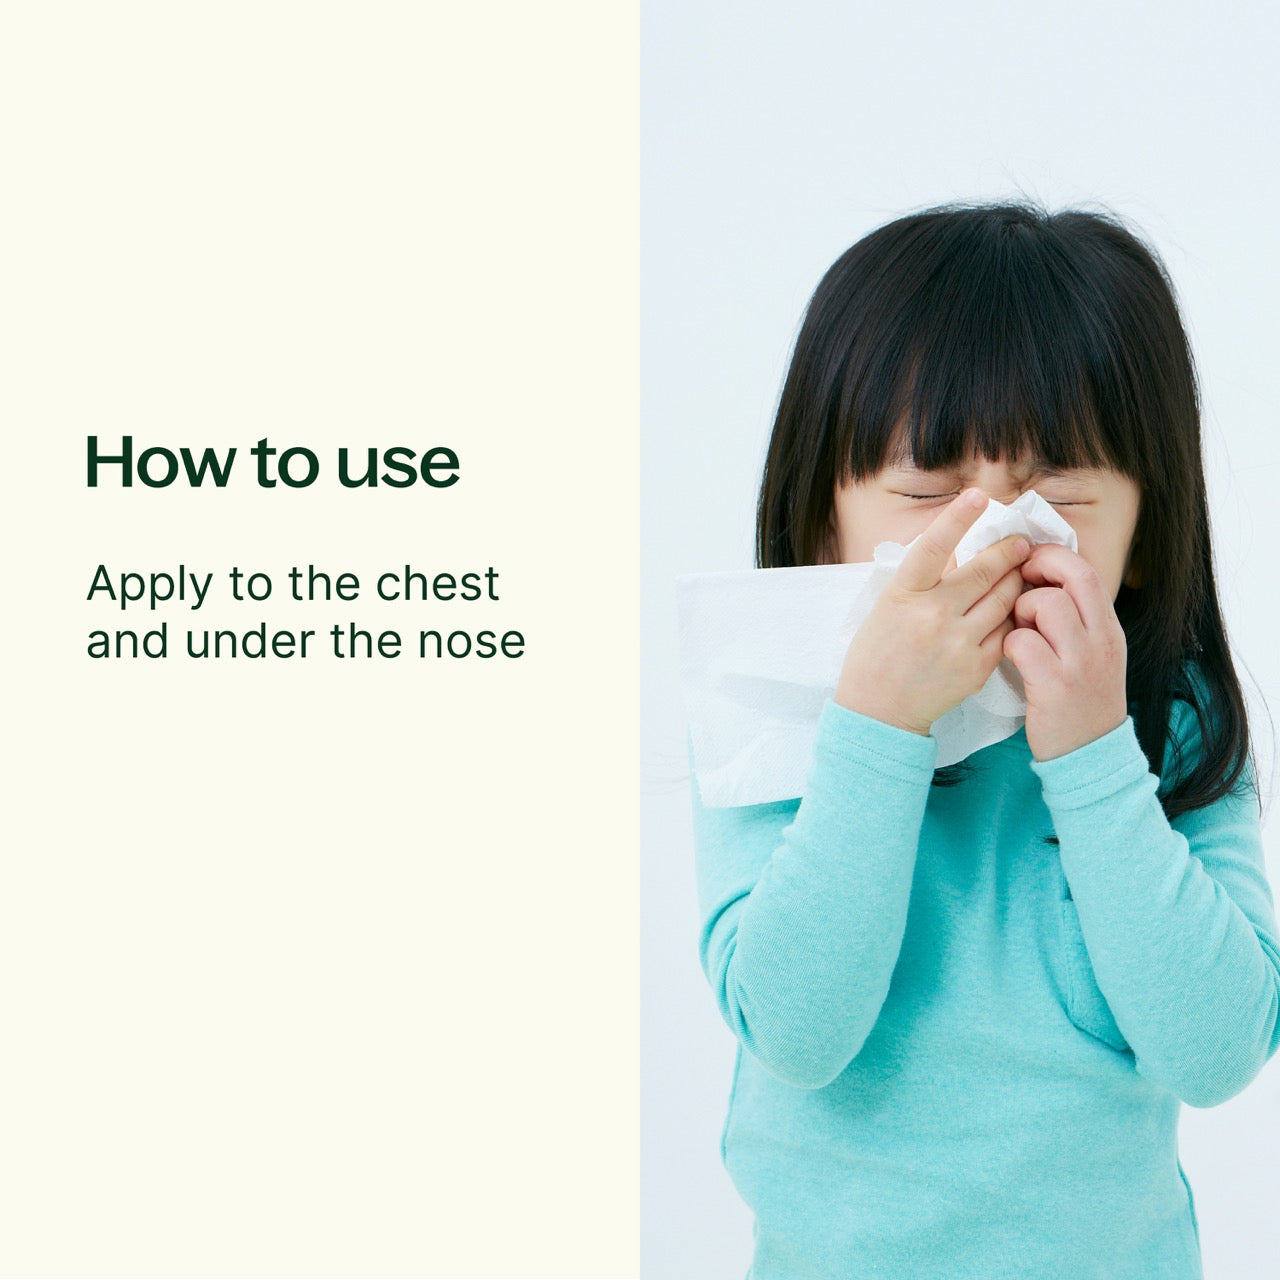 How to use Sniffle Stopper KidSafe Essential Oil Pre-Diluted Roll-On: Apply to the chest and under the nose